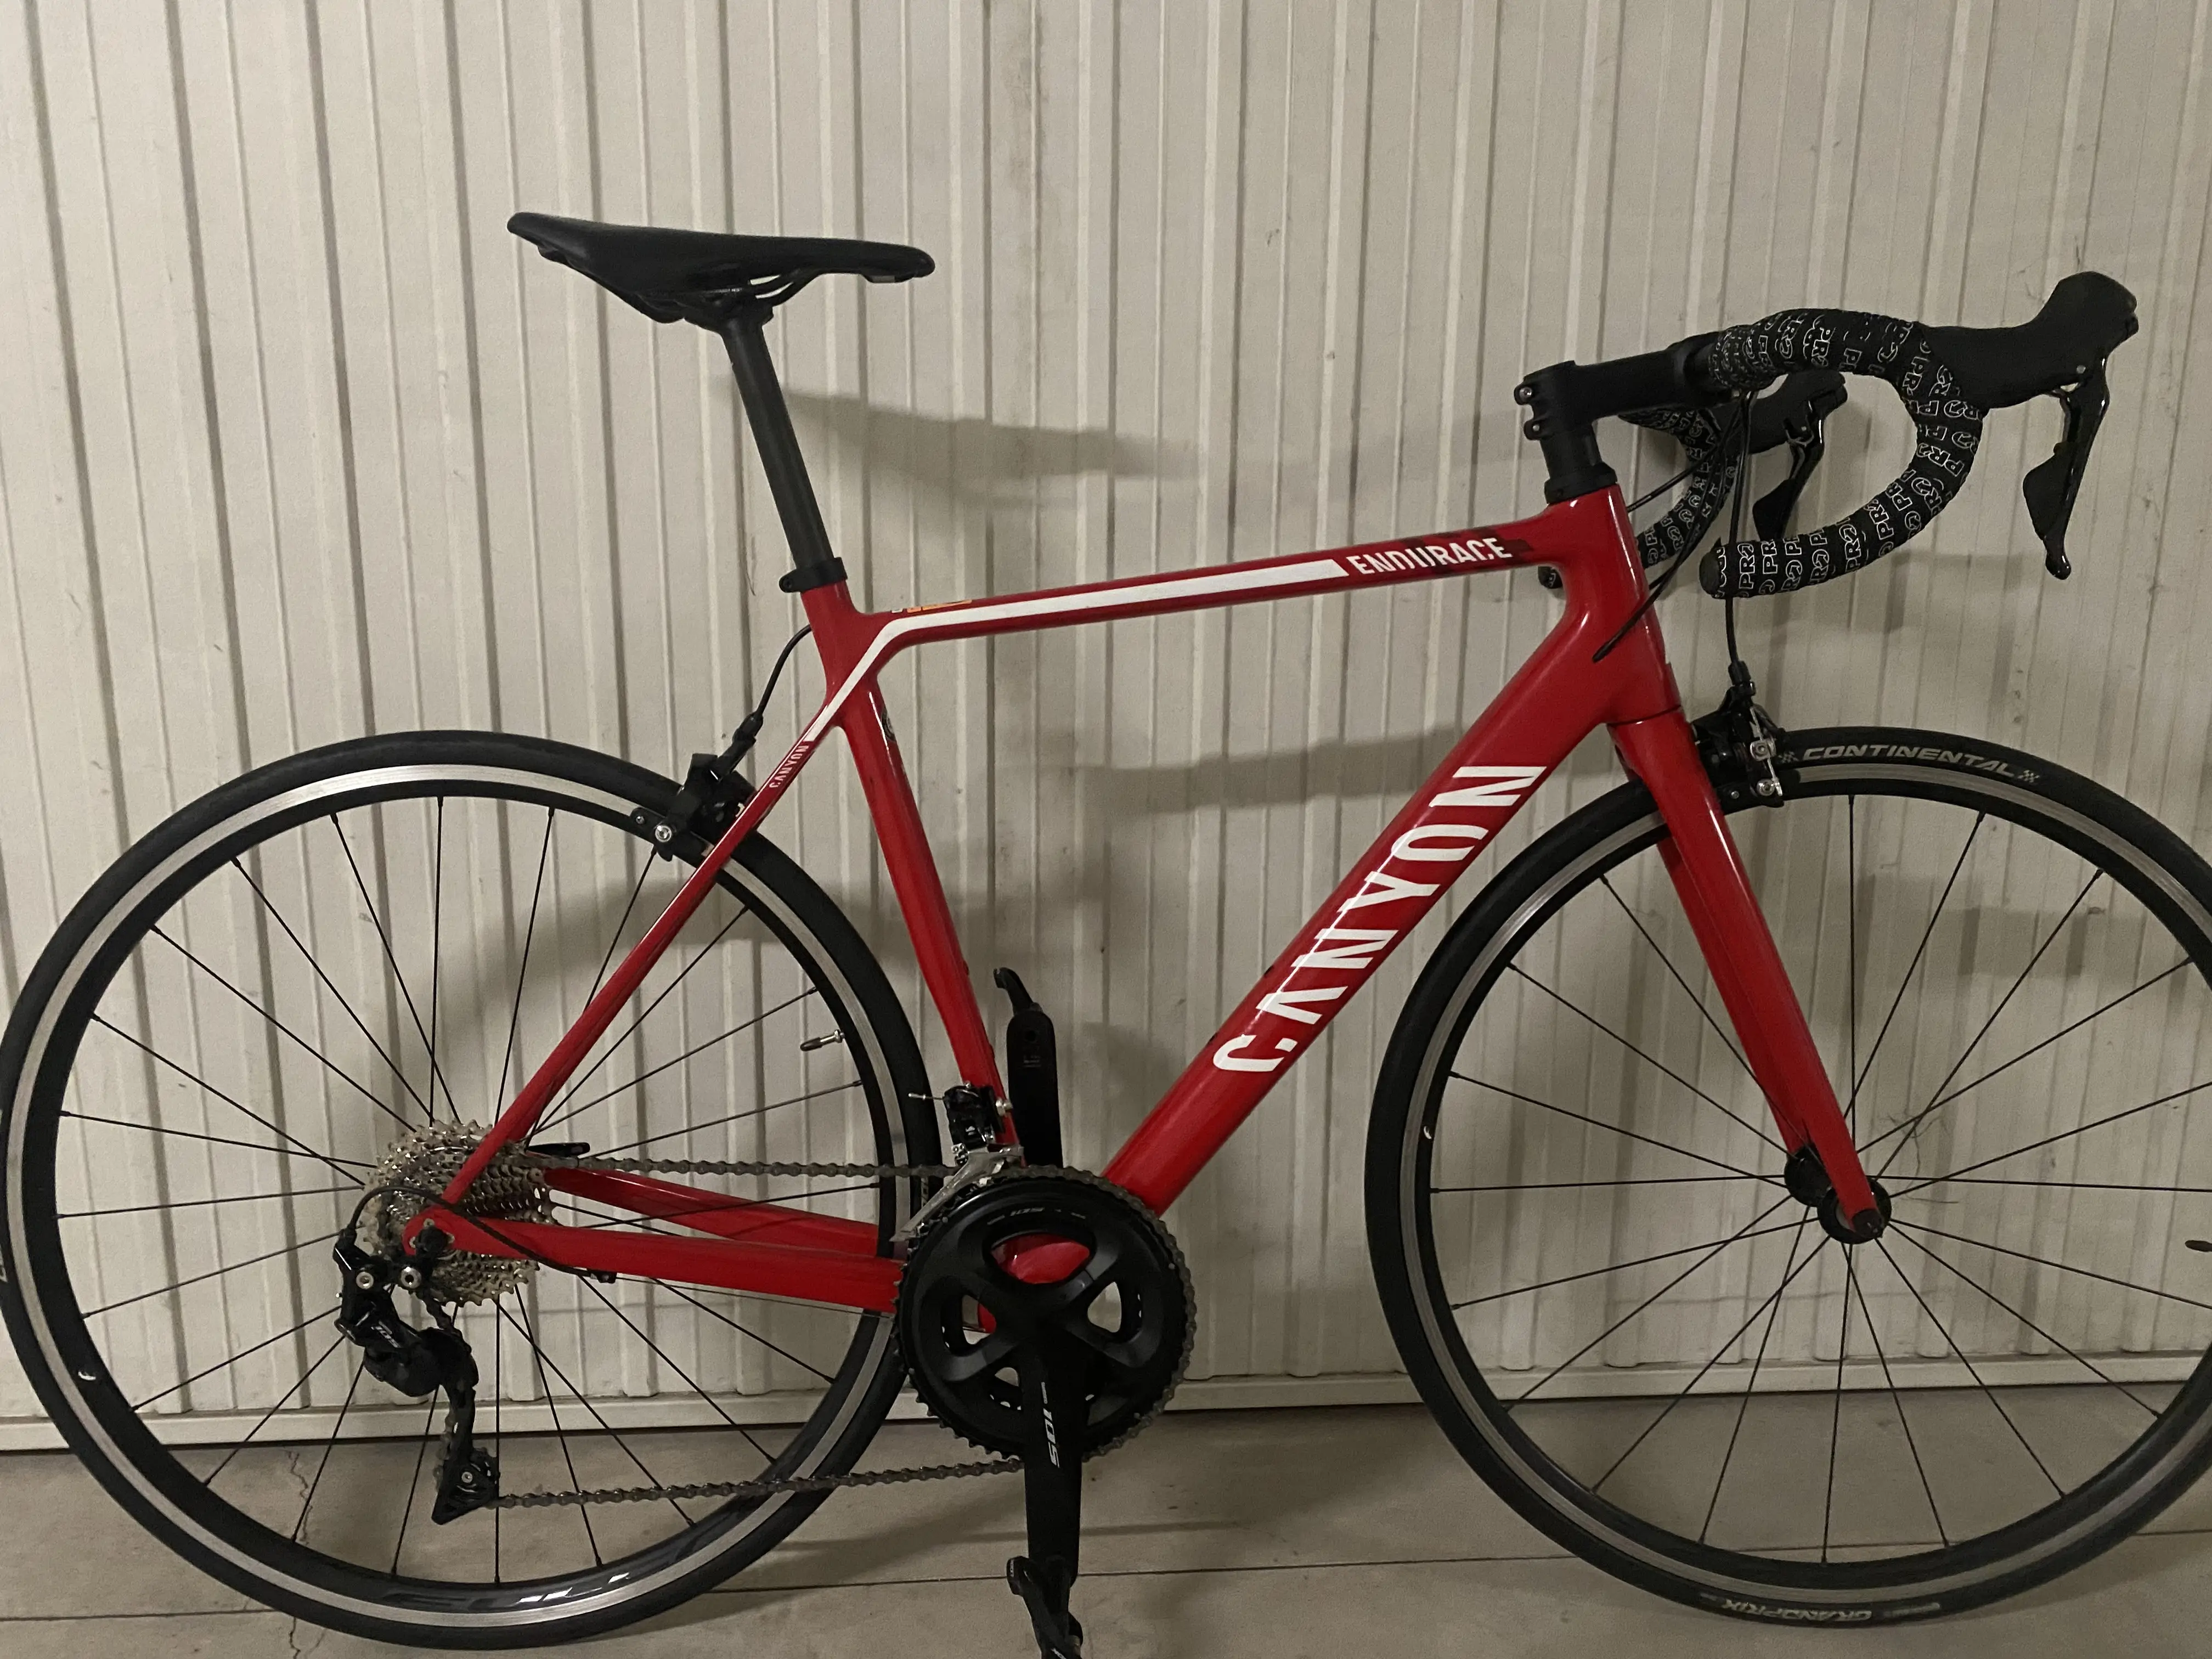 Canyon Endurace CF 7.0 used in M | buycycle